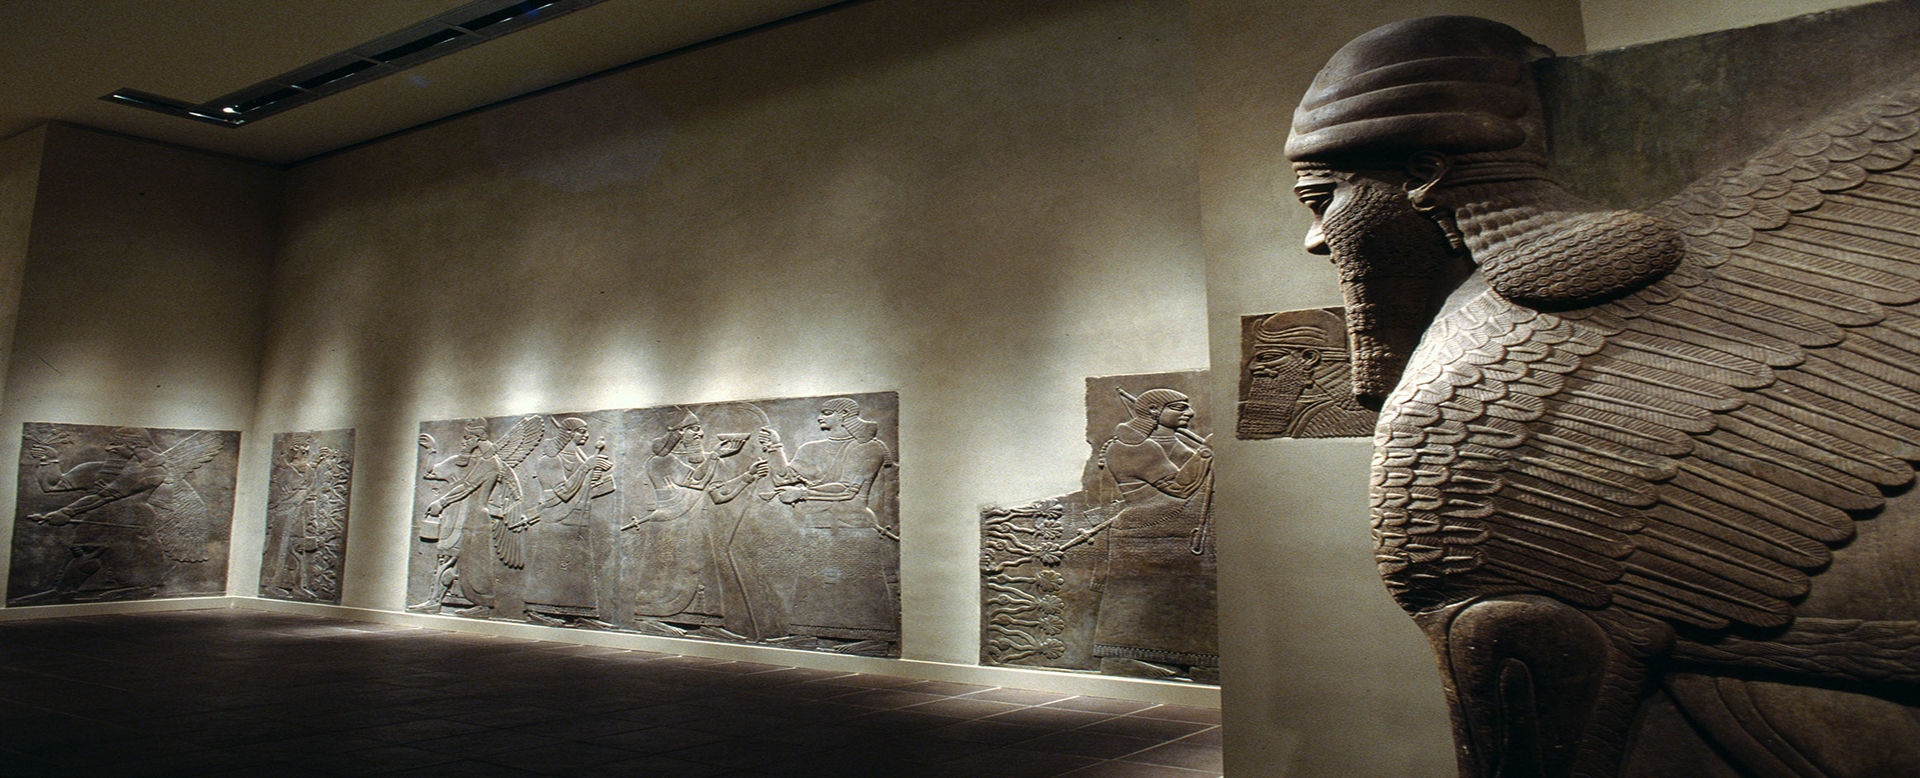 Two individuals in the Assyrian Court, Gallery 401 at the Metropolitan Museum of Art.